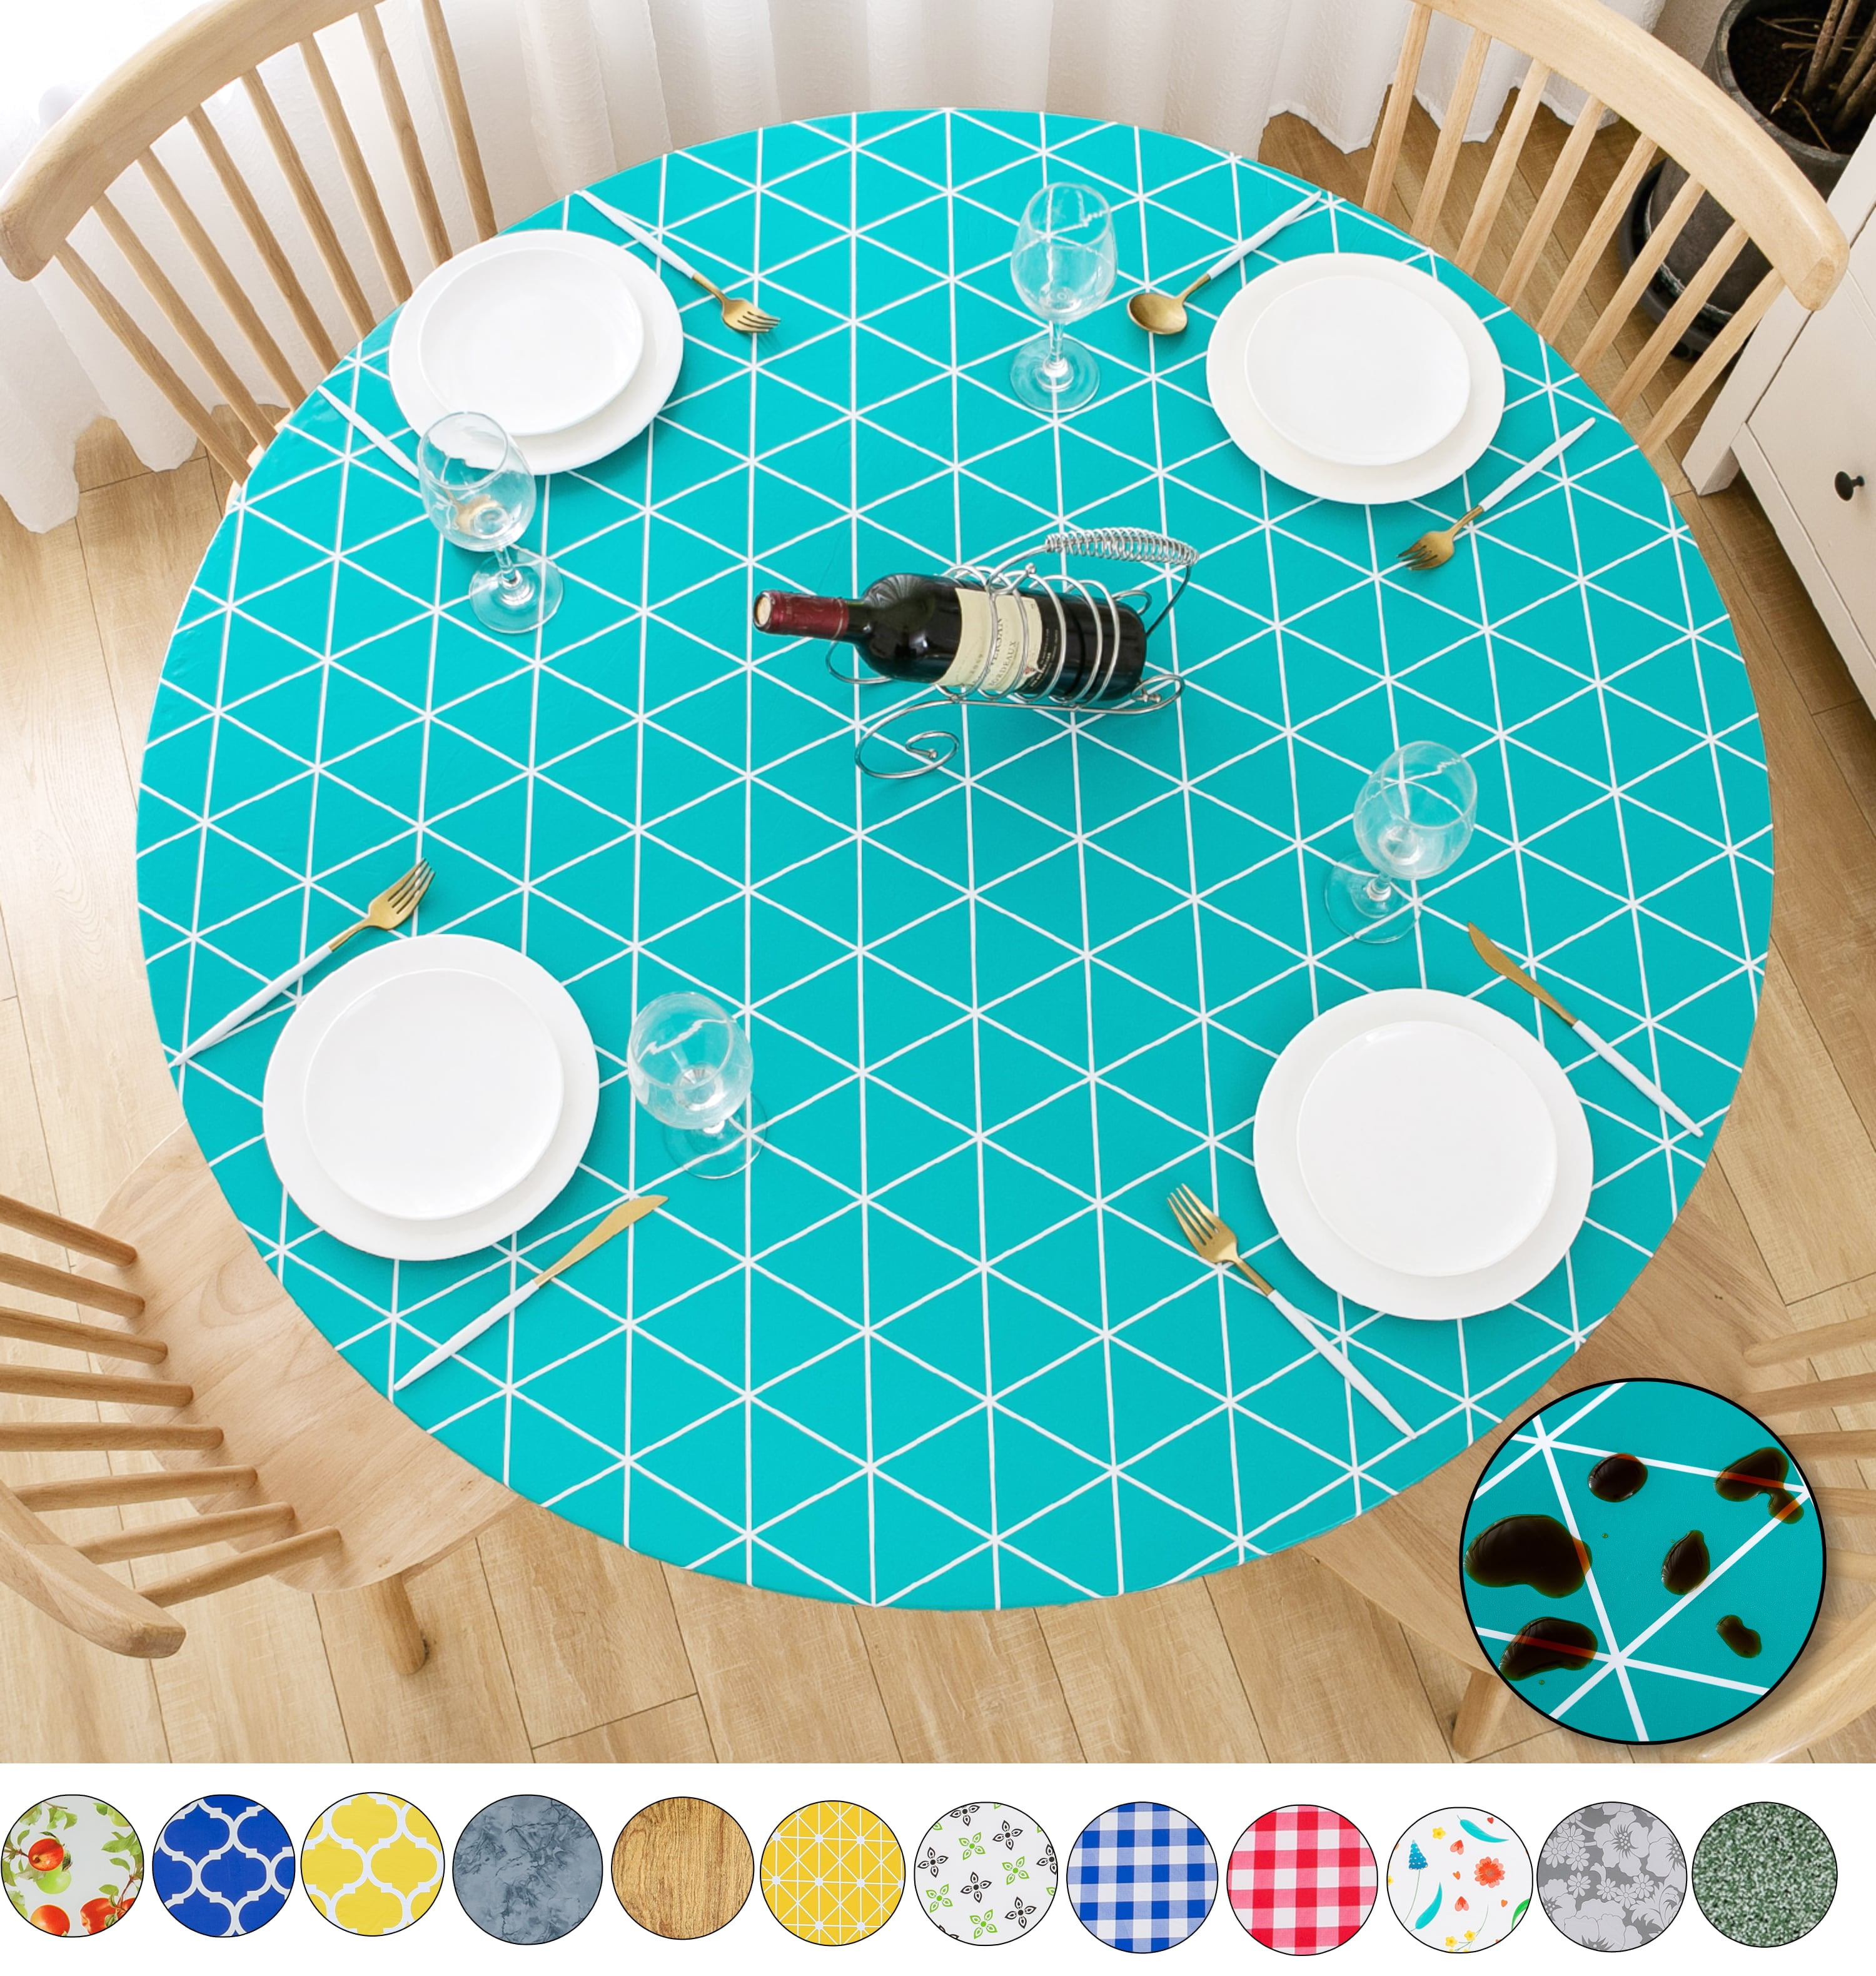 Flannel Backing Fenteer Indoor Outdoor Patio Round Fitted Vinyl Tablecloth Patio Elastic Edge gray L Parties Spill Proof Wipeable Plastic Cover for Dining Table